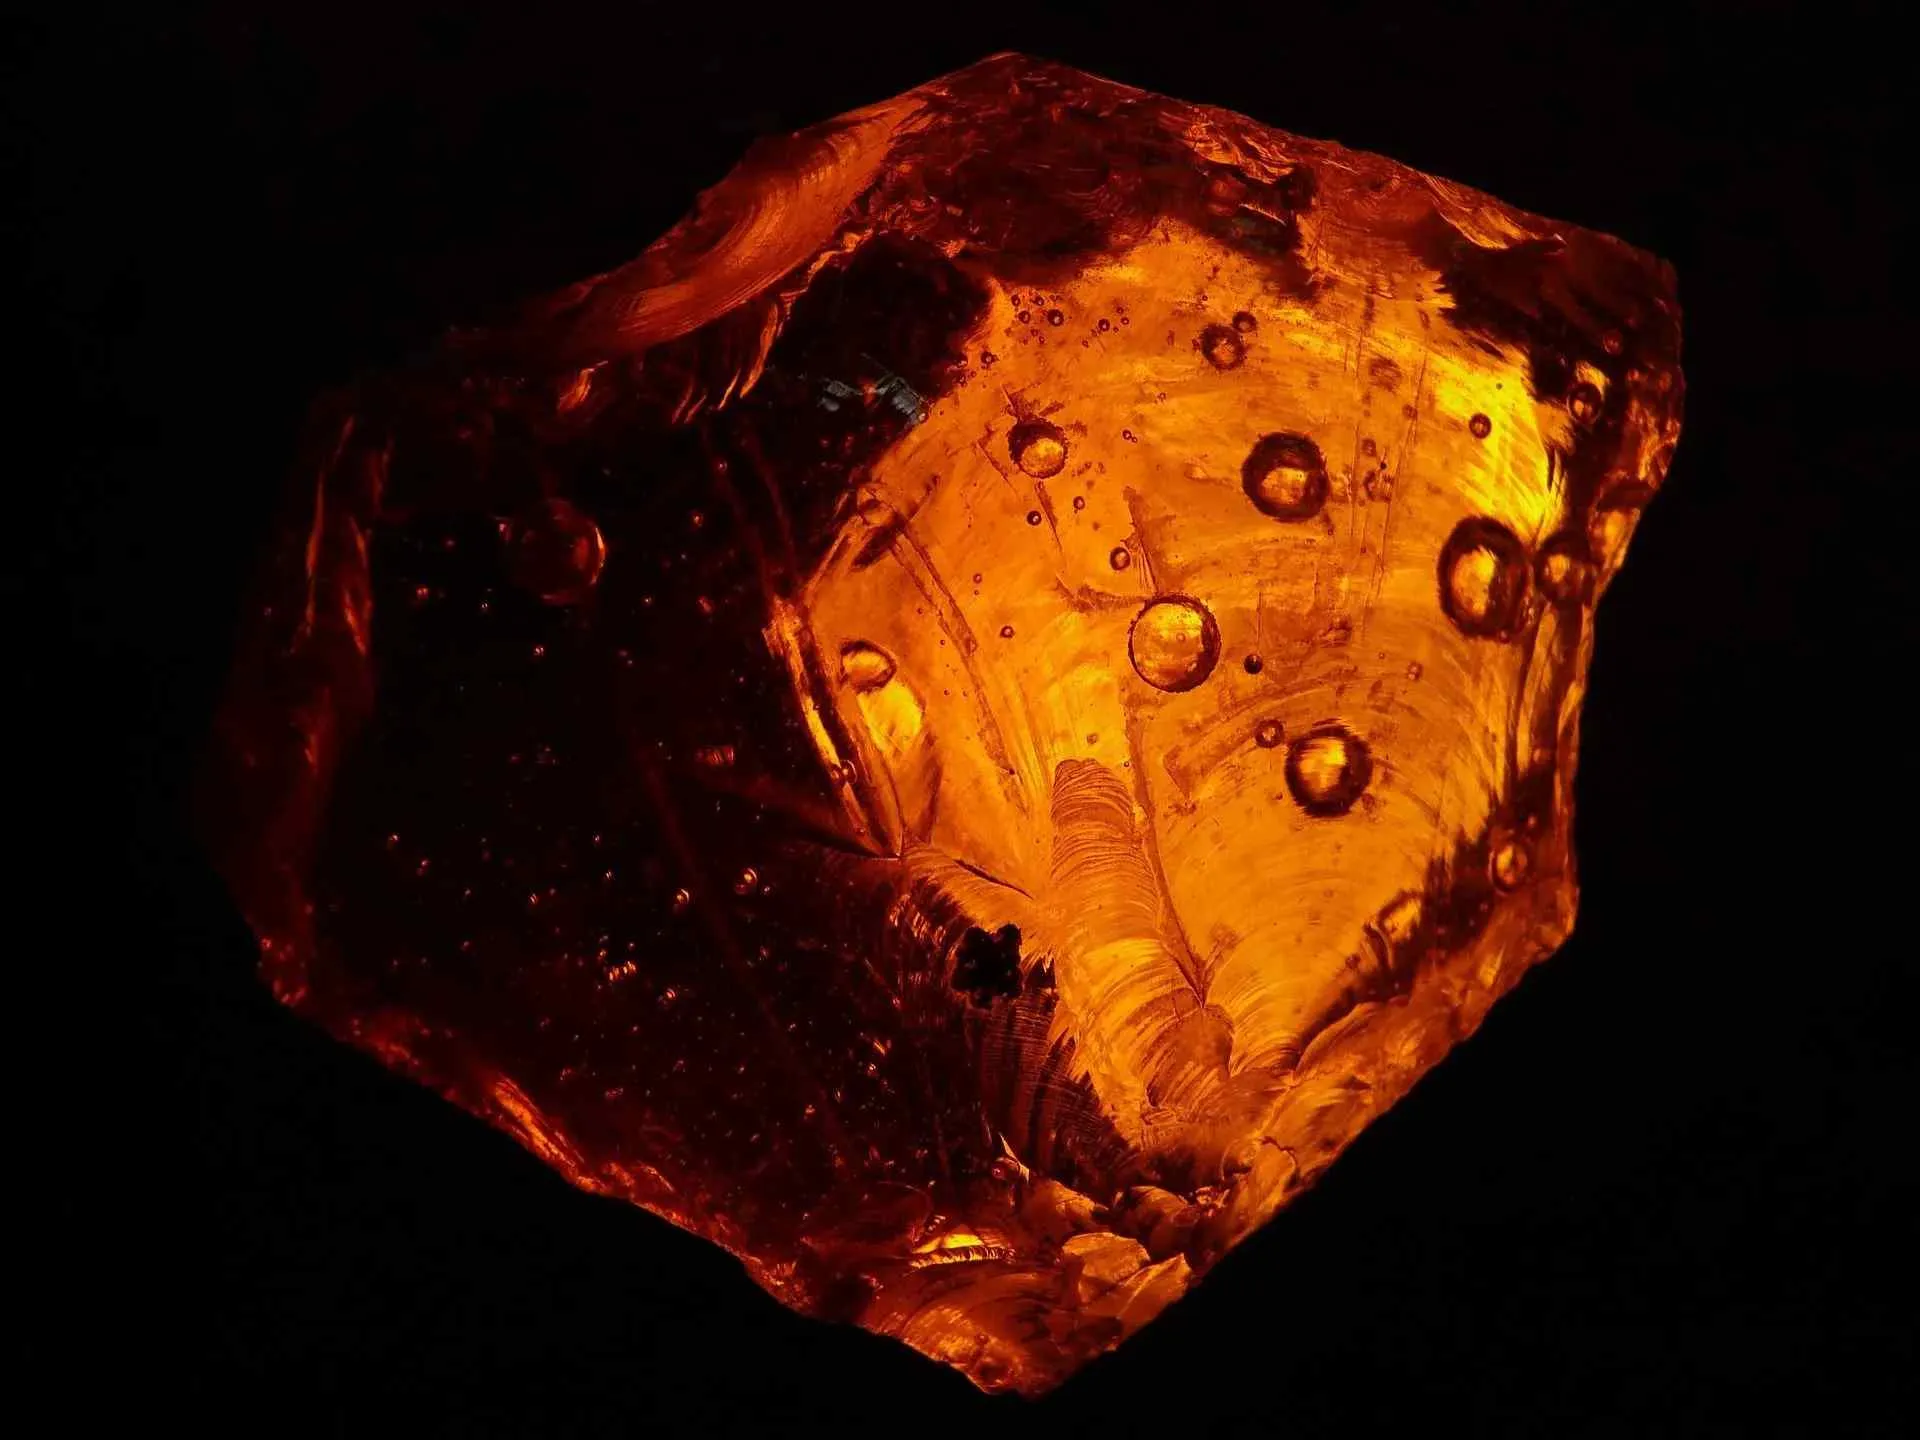 Amber fossils facts include that amber is a tree resin that gets solidified due to pressure and heat conditions and transforms into a beautiful, yellow, golden gem.